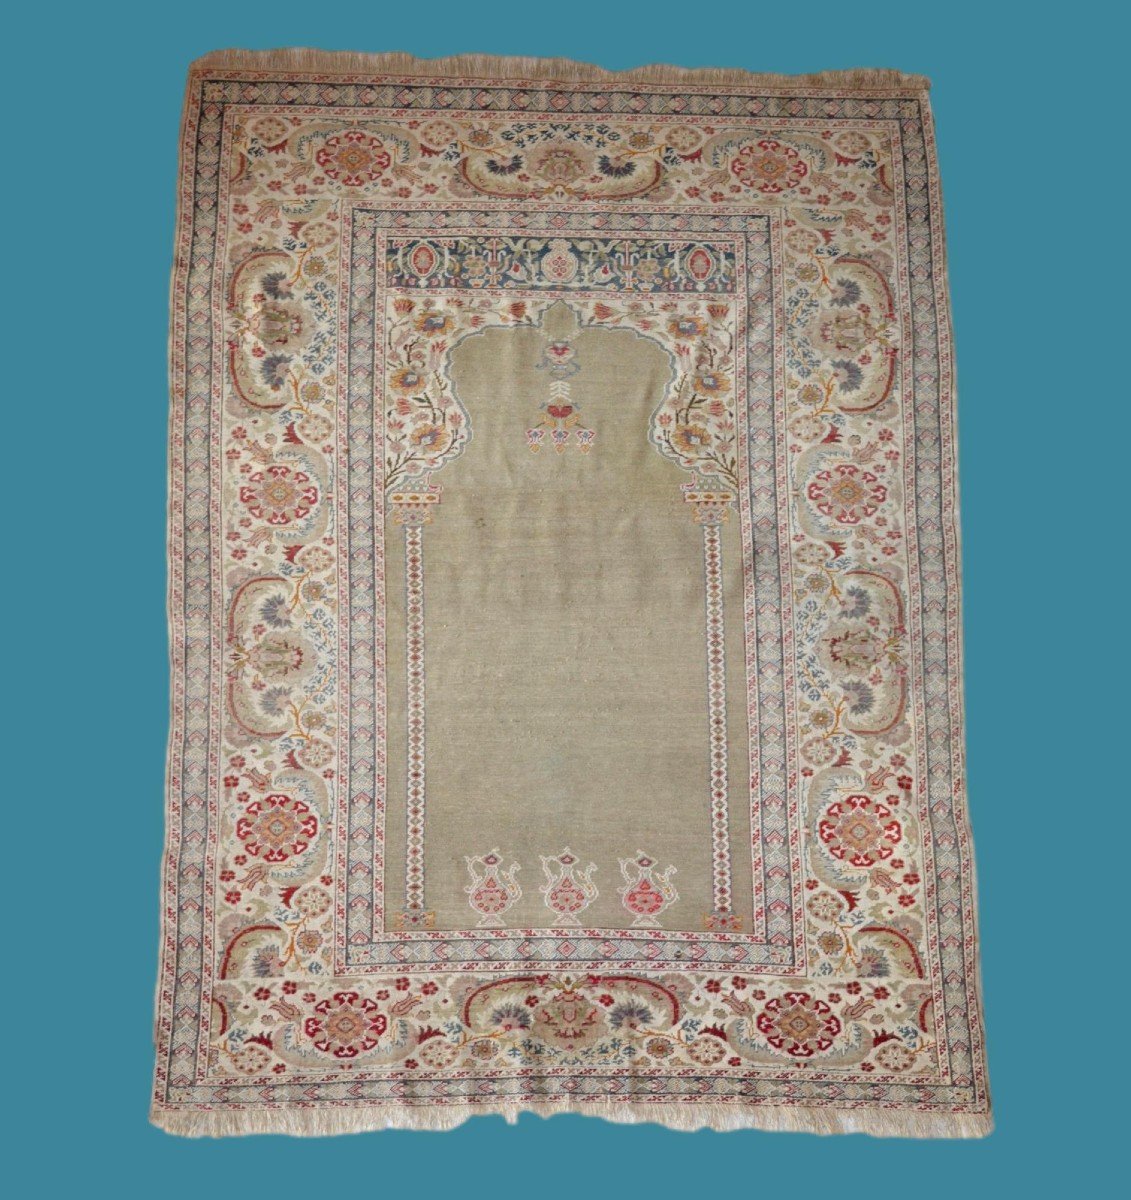 Old Istanbul Prayer Rug, Silk And Wool, 128 Cm X 179 Cm, Ottoman Empire, Early 20th Century-photo-7